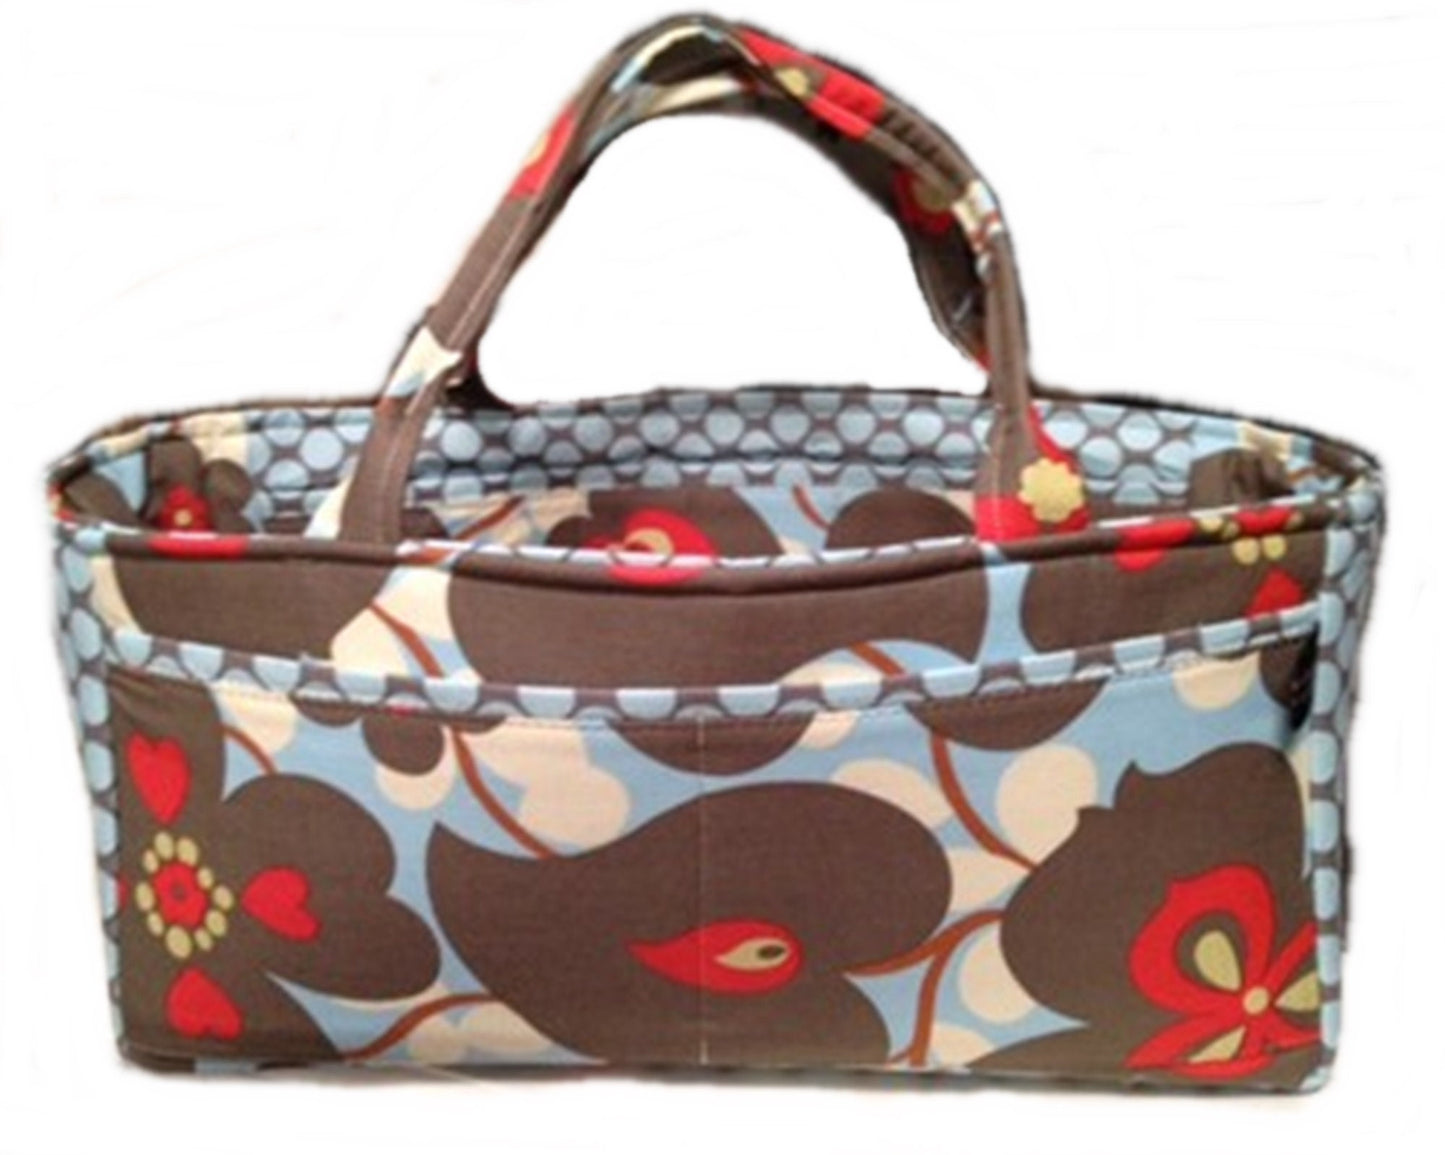 Scrapbooking Caddy Sewing Tote Diaper Tote Amy Butler Lotus Morning Glory Full Moon Dot